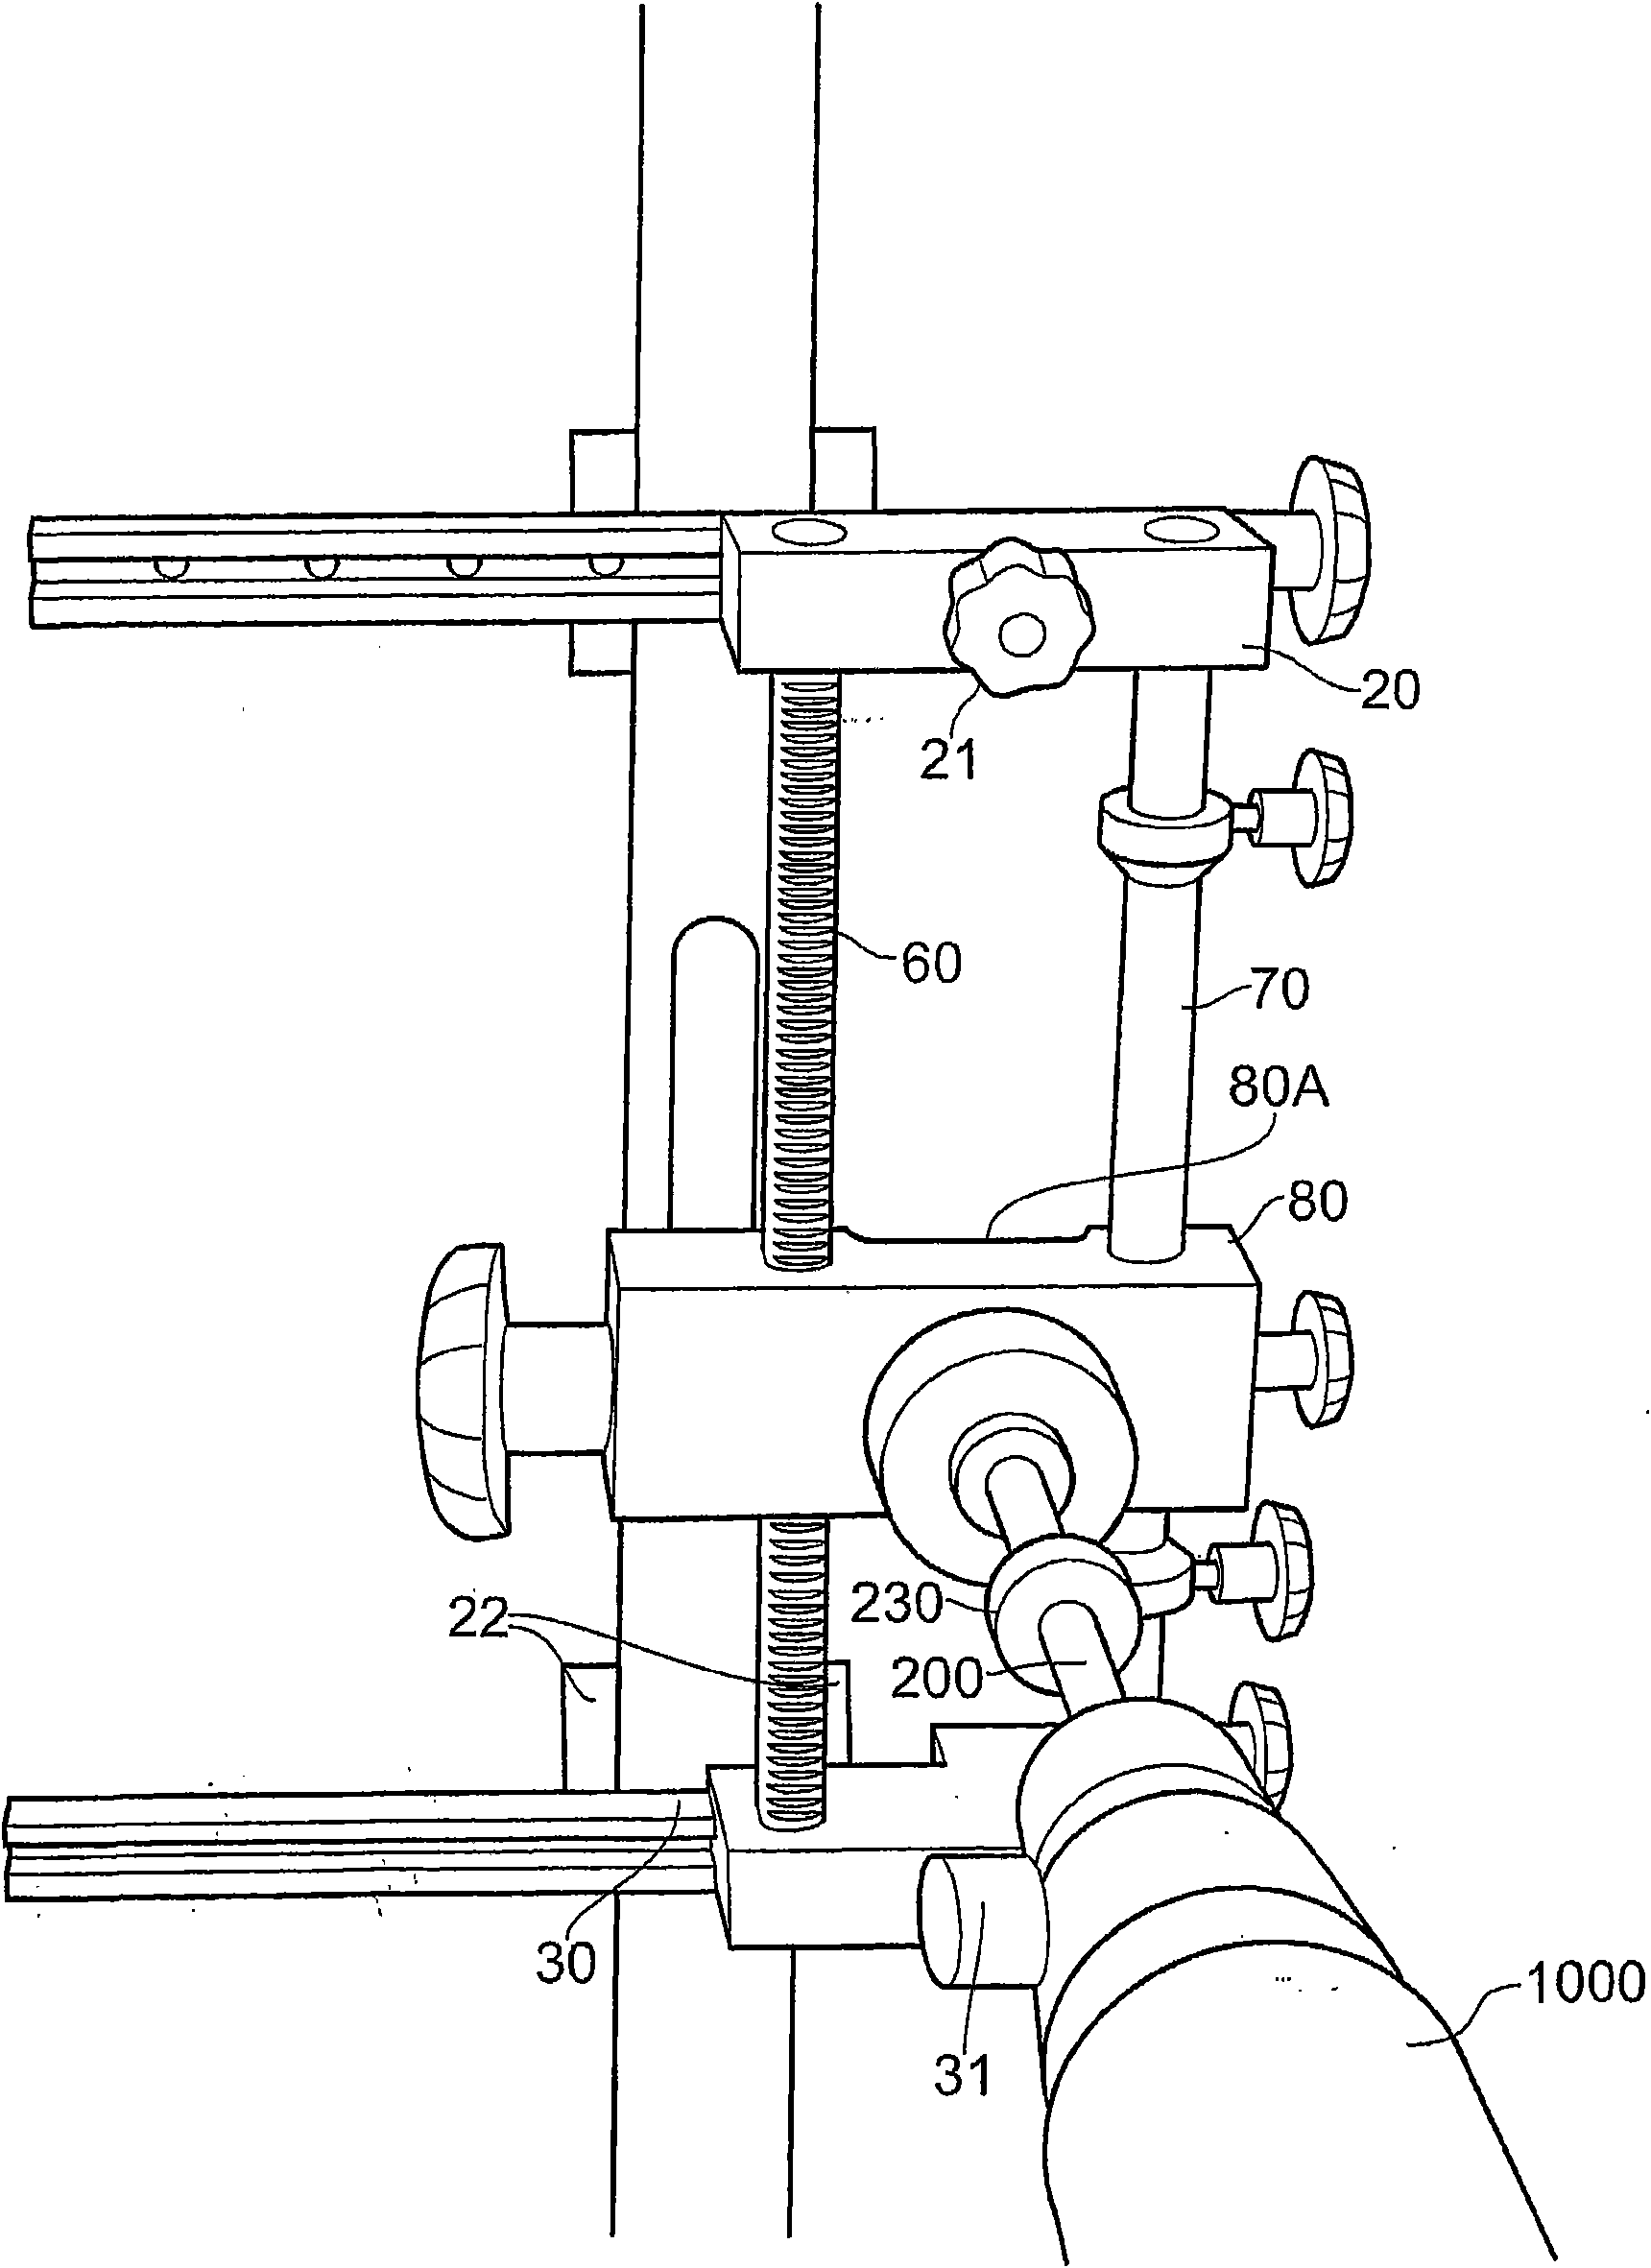 Cutting apparatus and method